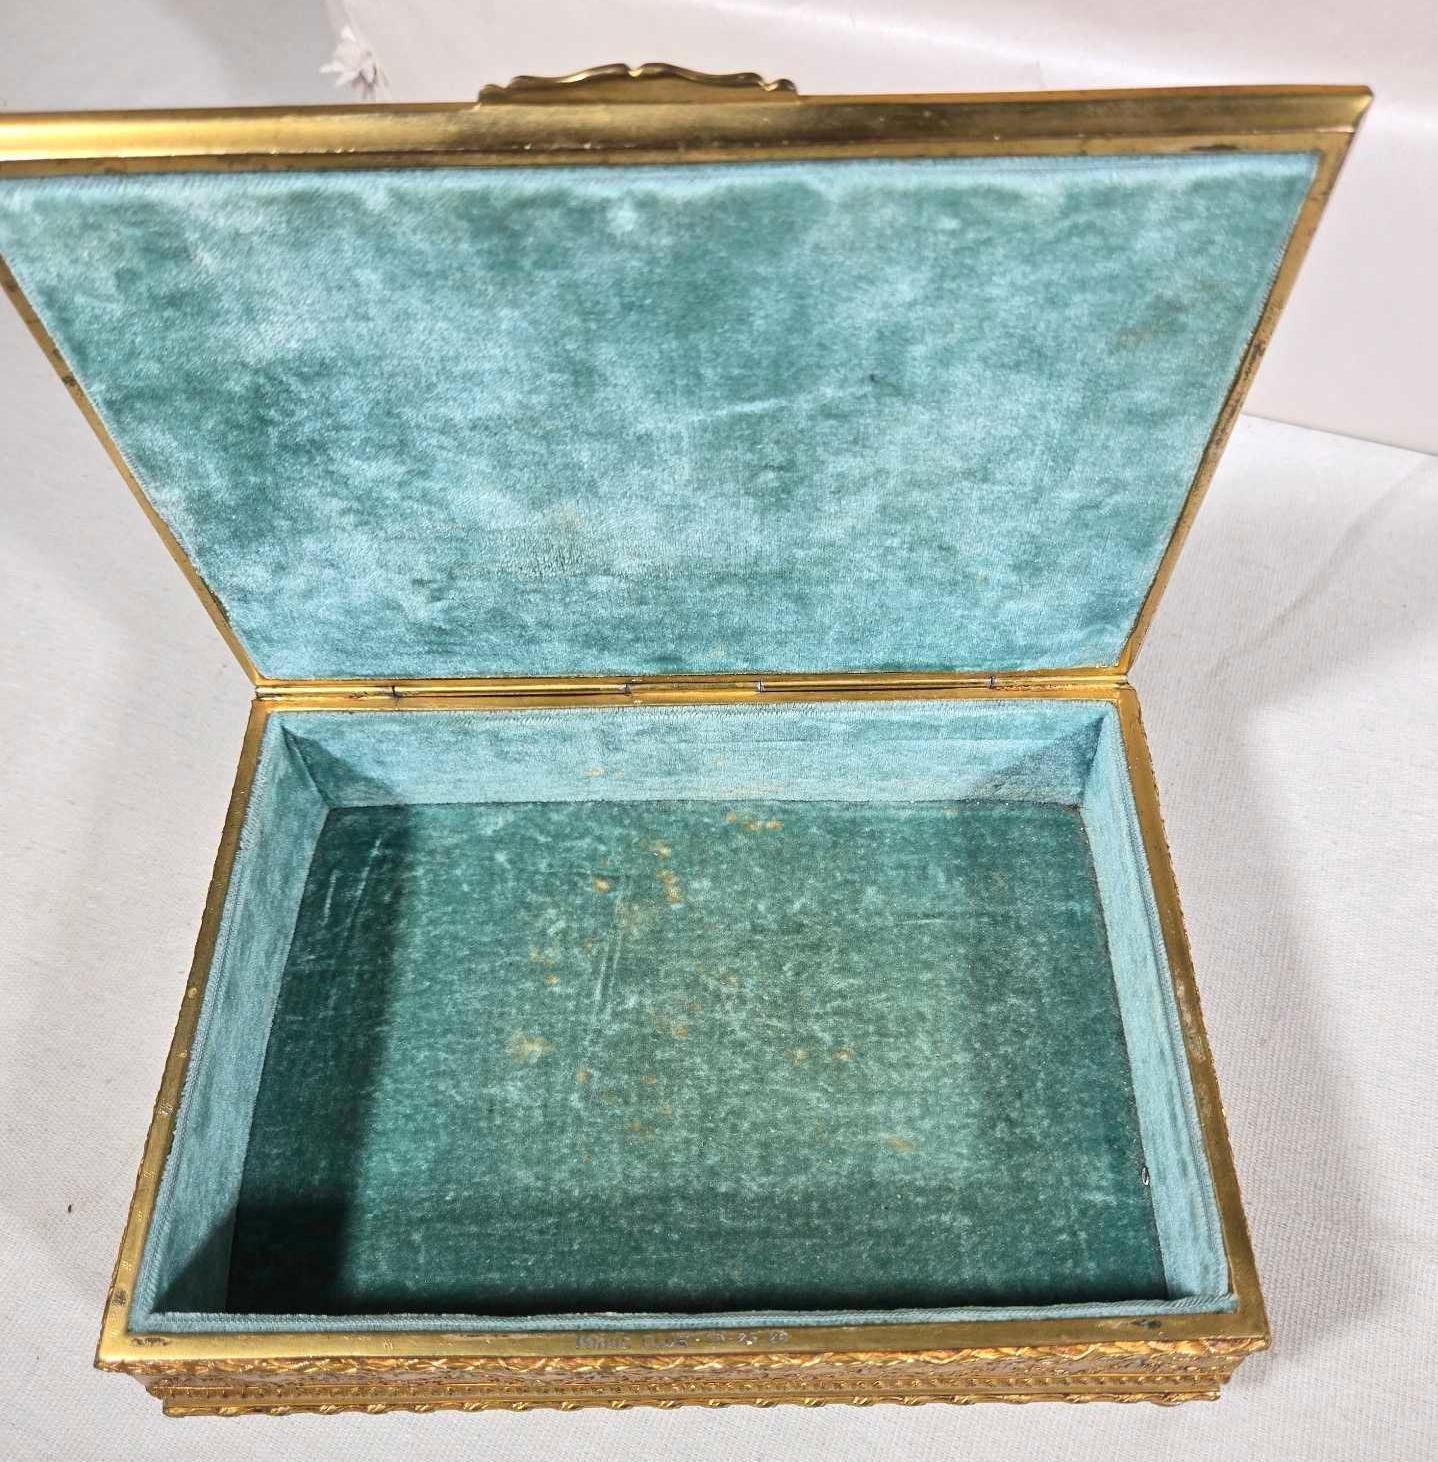 Ladies Lot Incl. Leather Handbags, Hinged Boxes, Lalique Perfume Bottles & Trinket Dish, & More